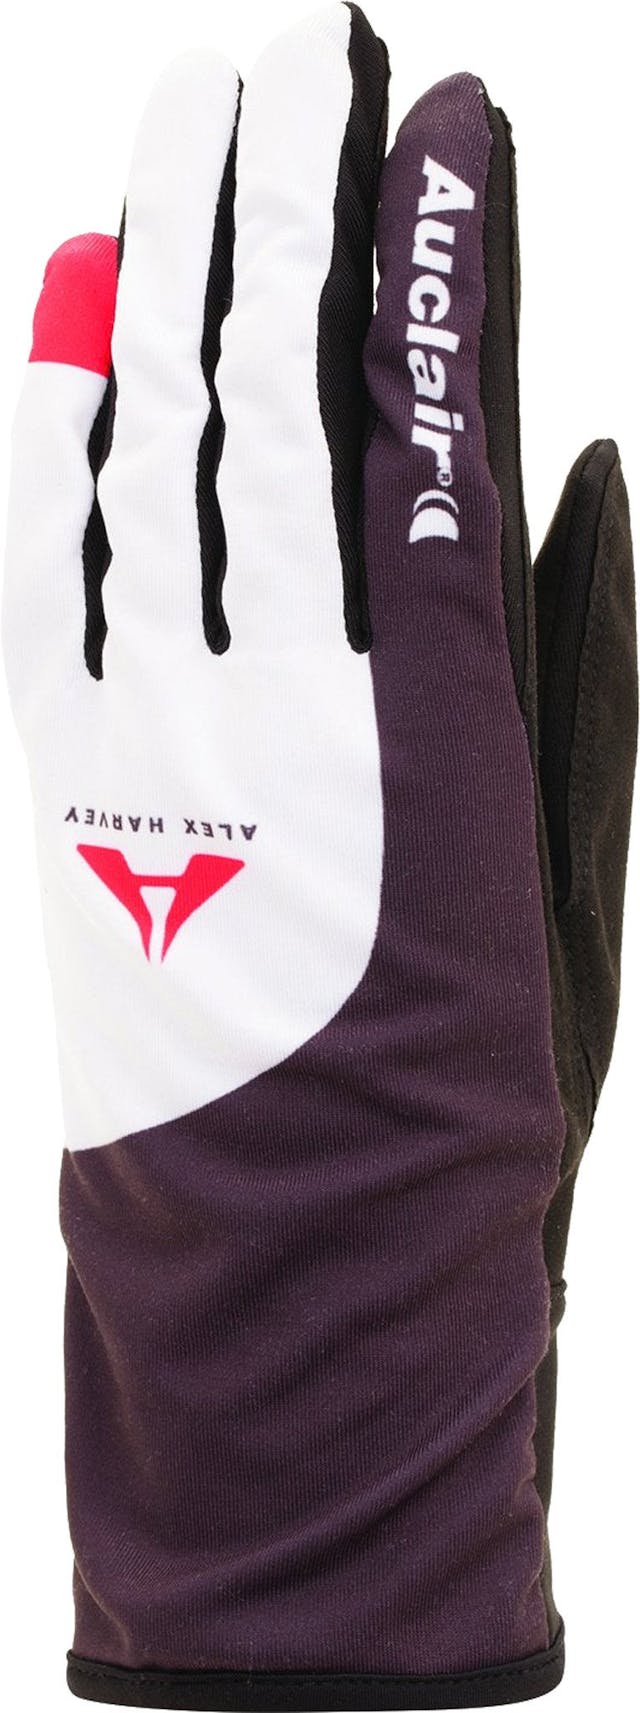 Product image for Alex Harvey Light Race Gloves - Youth